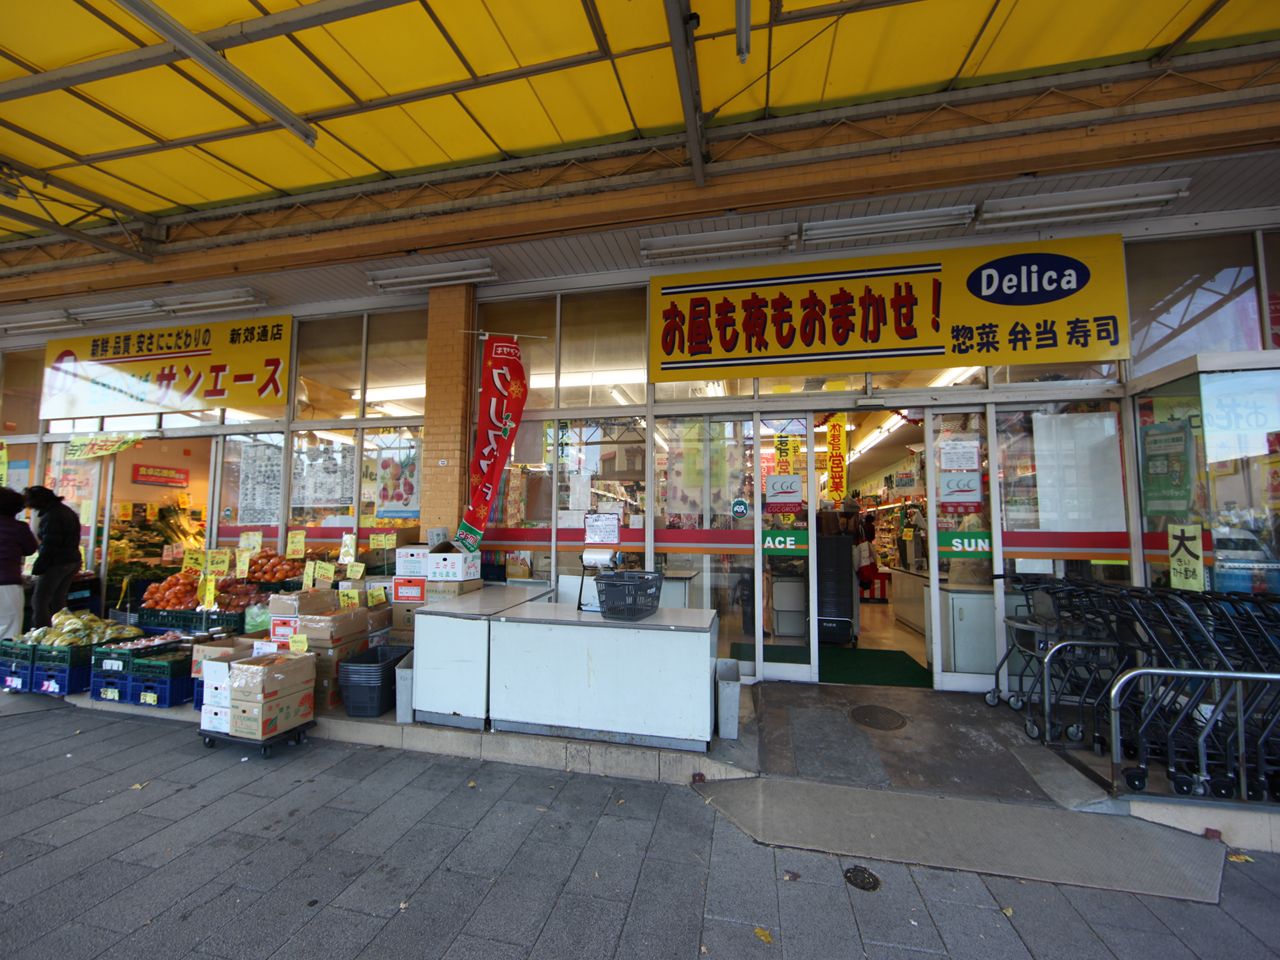 Supermarket. SAN ACE new 郊通 store up to (super) 778m